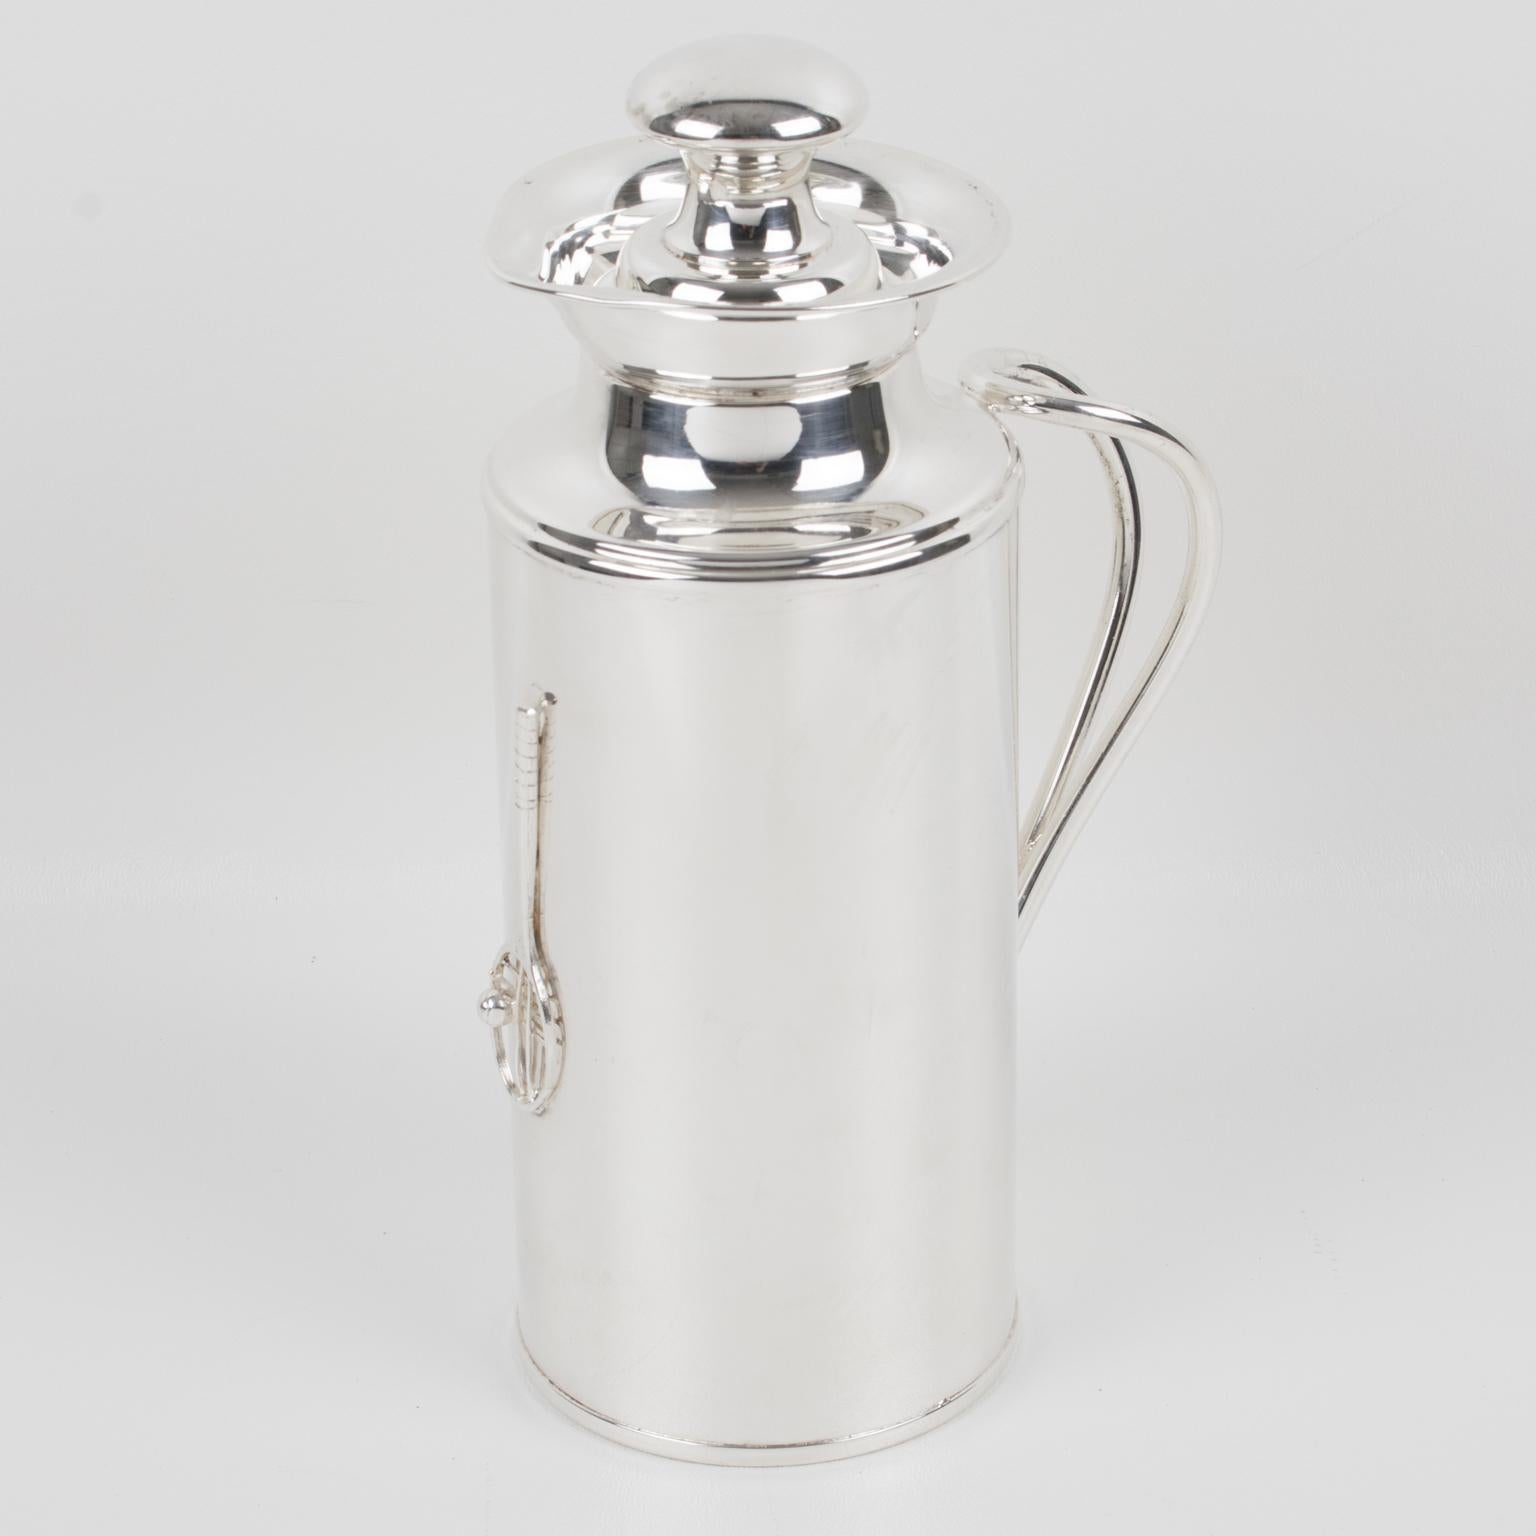 This streamlined Italian silver plate barware thermos or insulated decanter features a sleek and modernist design. The insulated carafe is made from silver plate metal. This bar accessory has a rounded shape ornate with double handles and a tennis